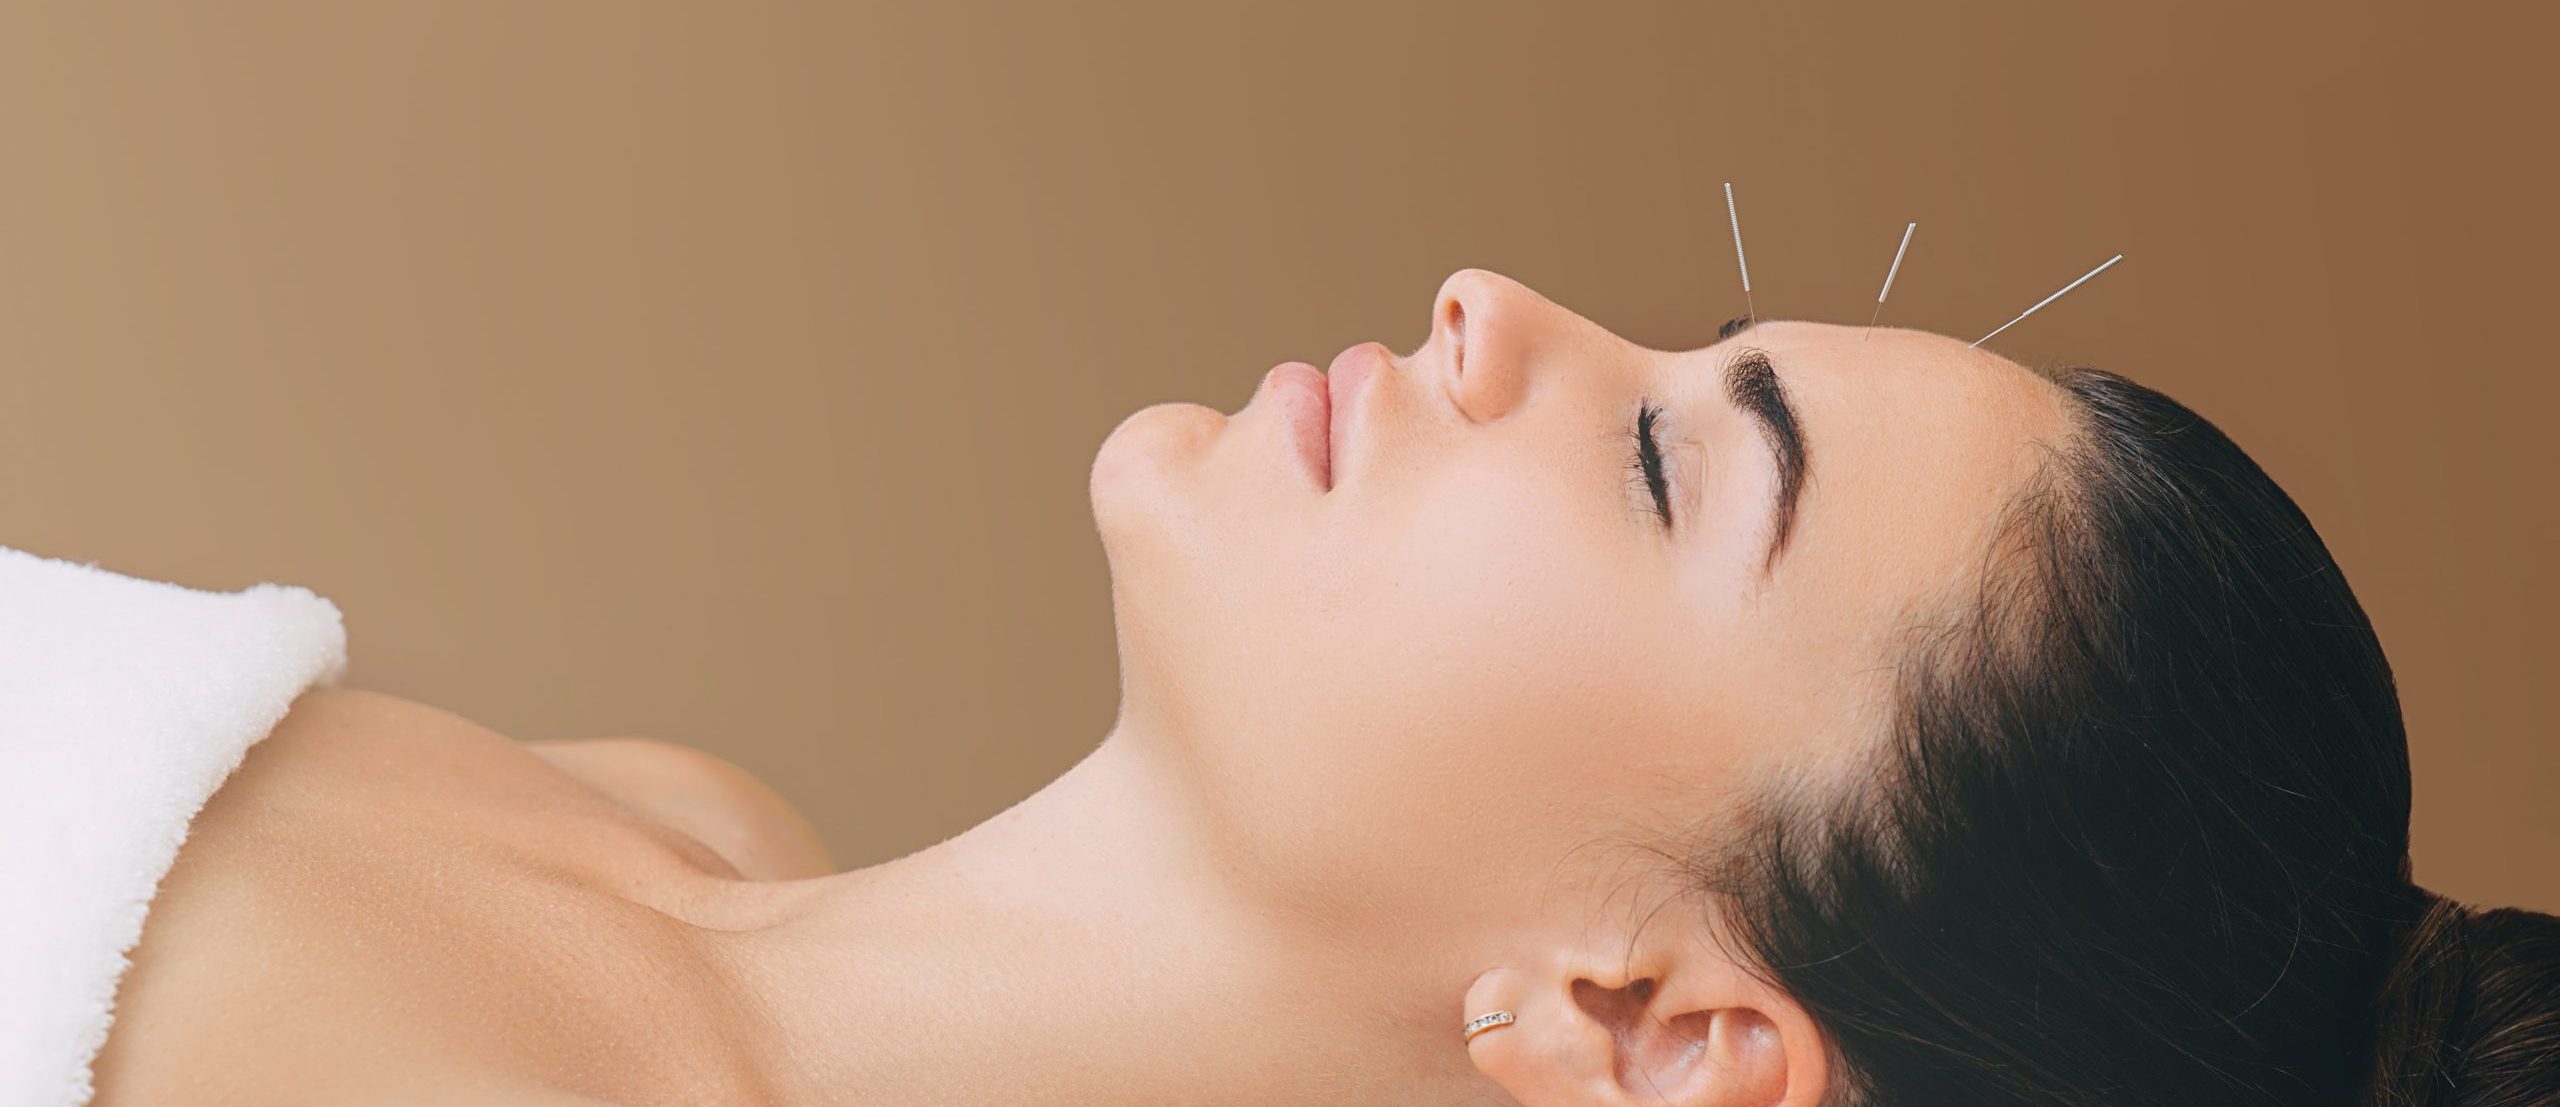 acupuncture treatments for headaches and migraines